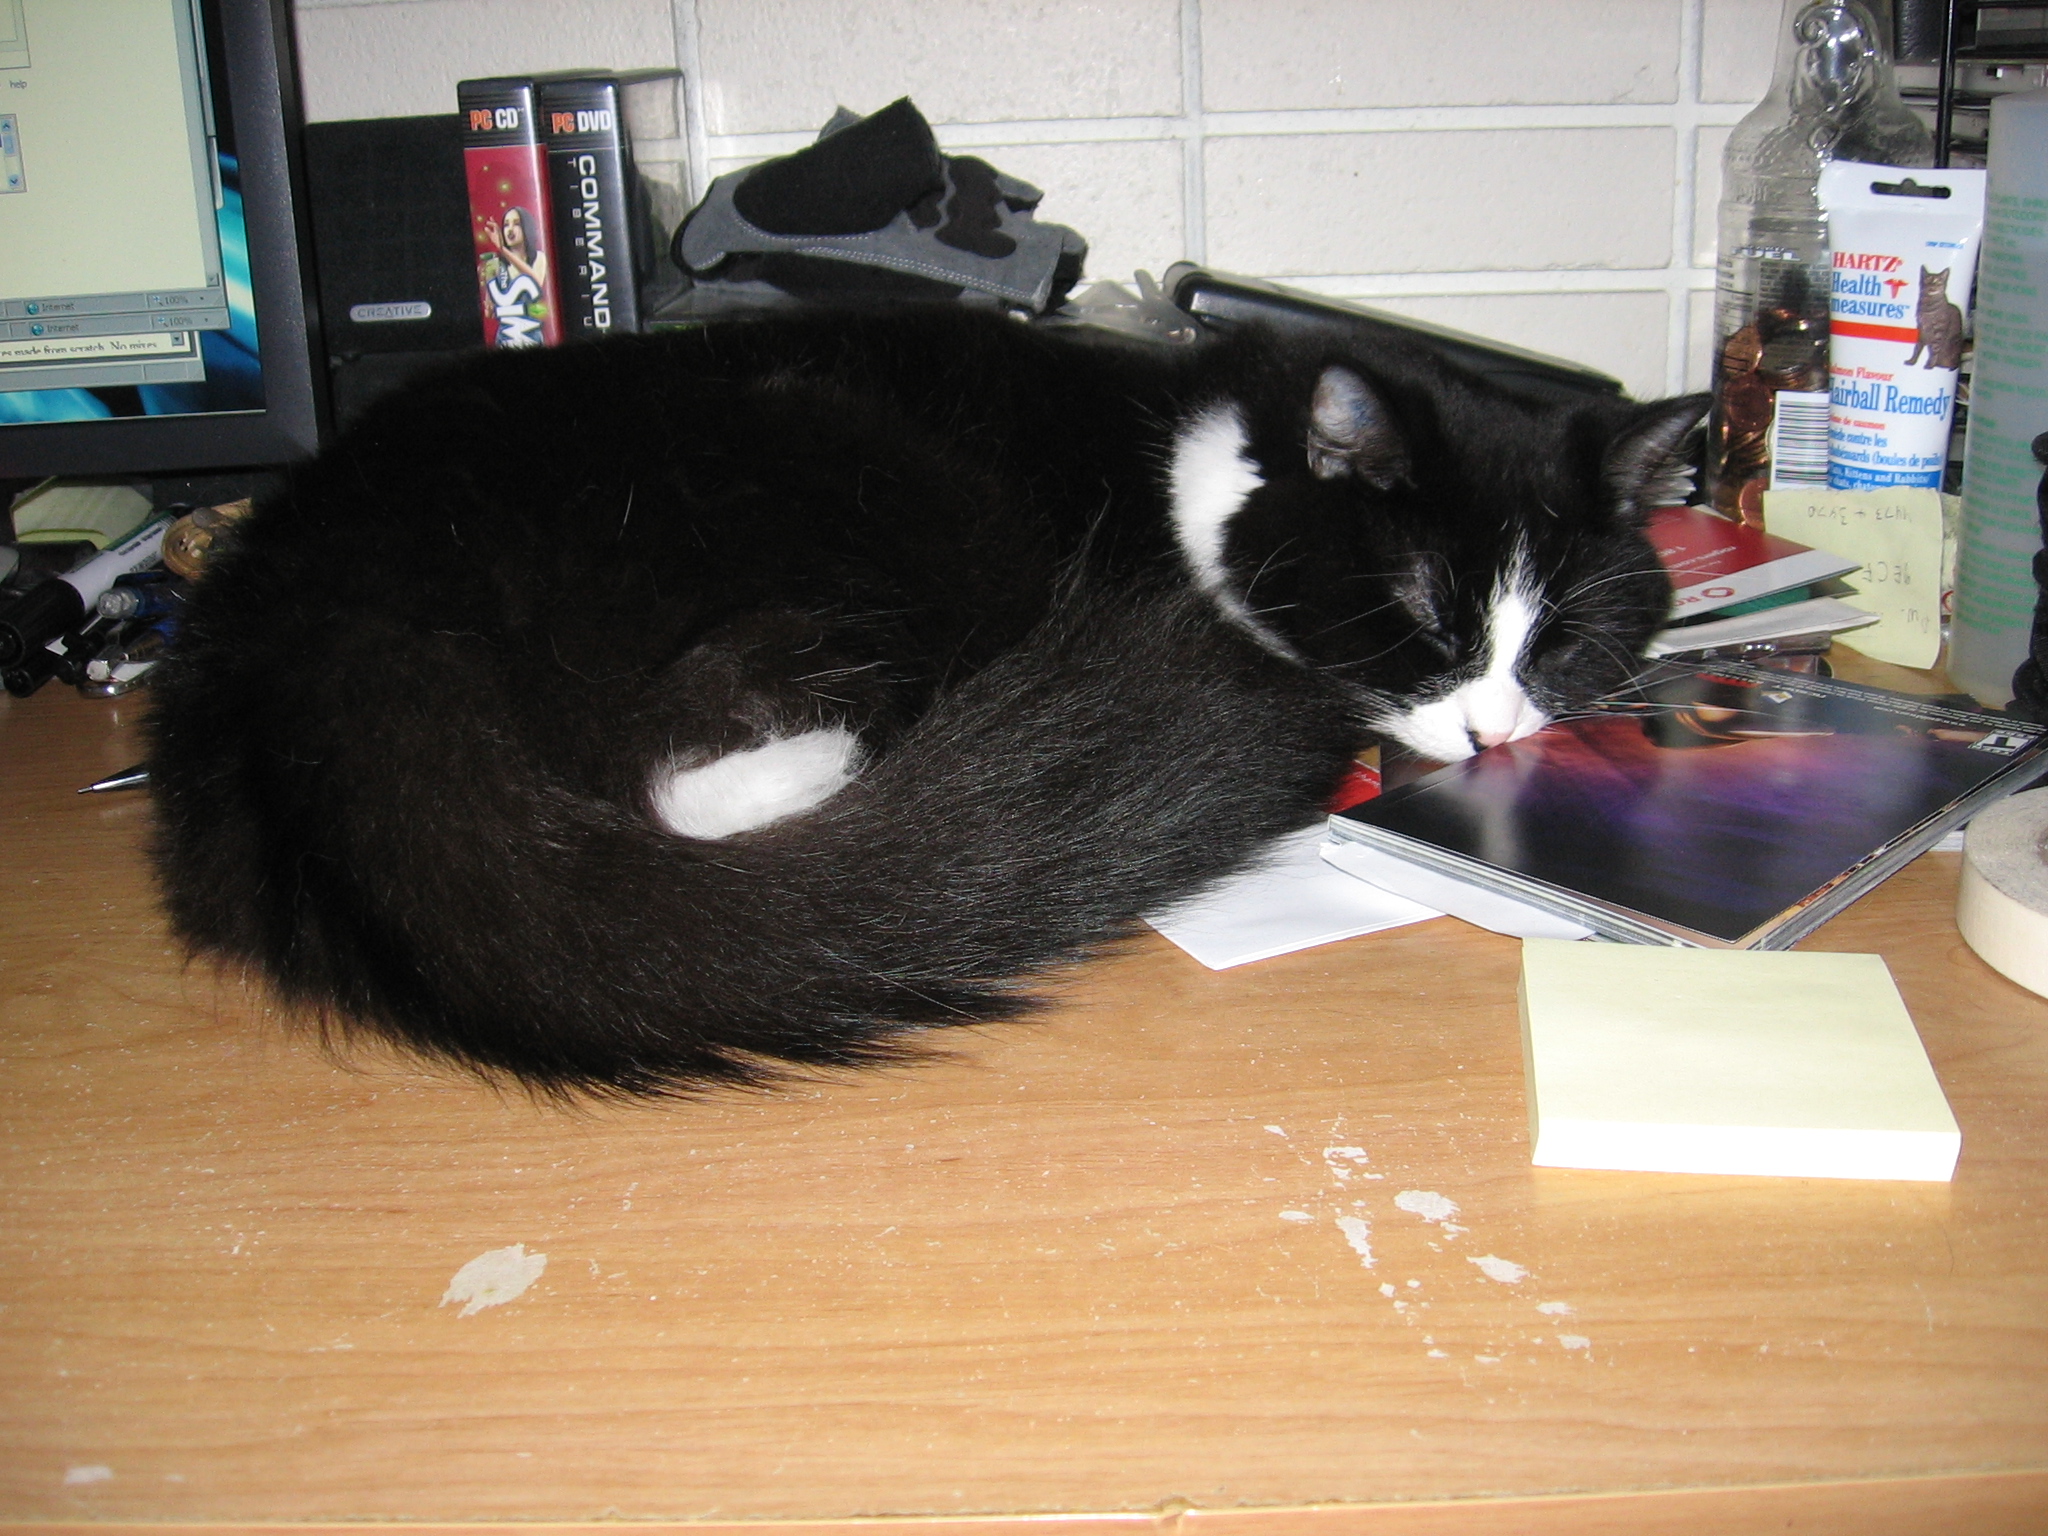 Nikita curled up on the computer desk, overtop of a pile of papers and books.